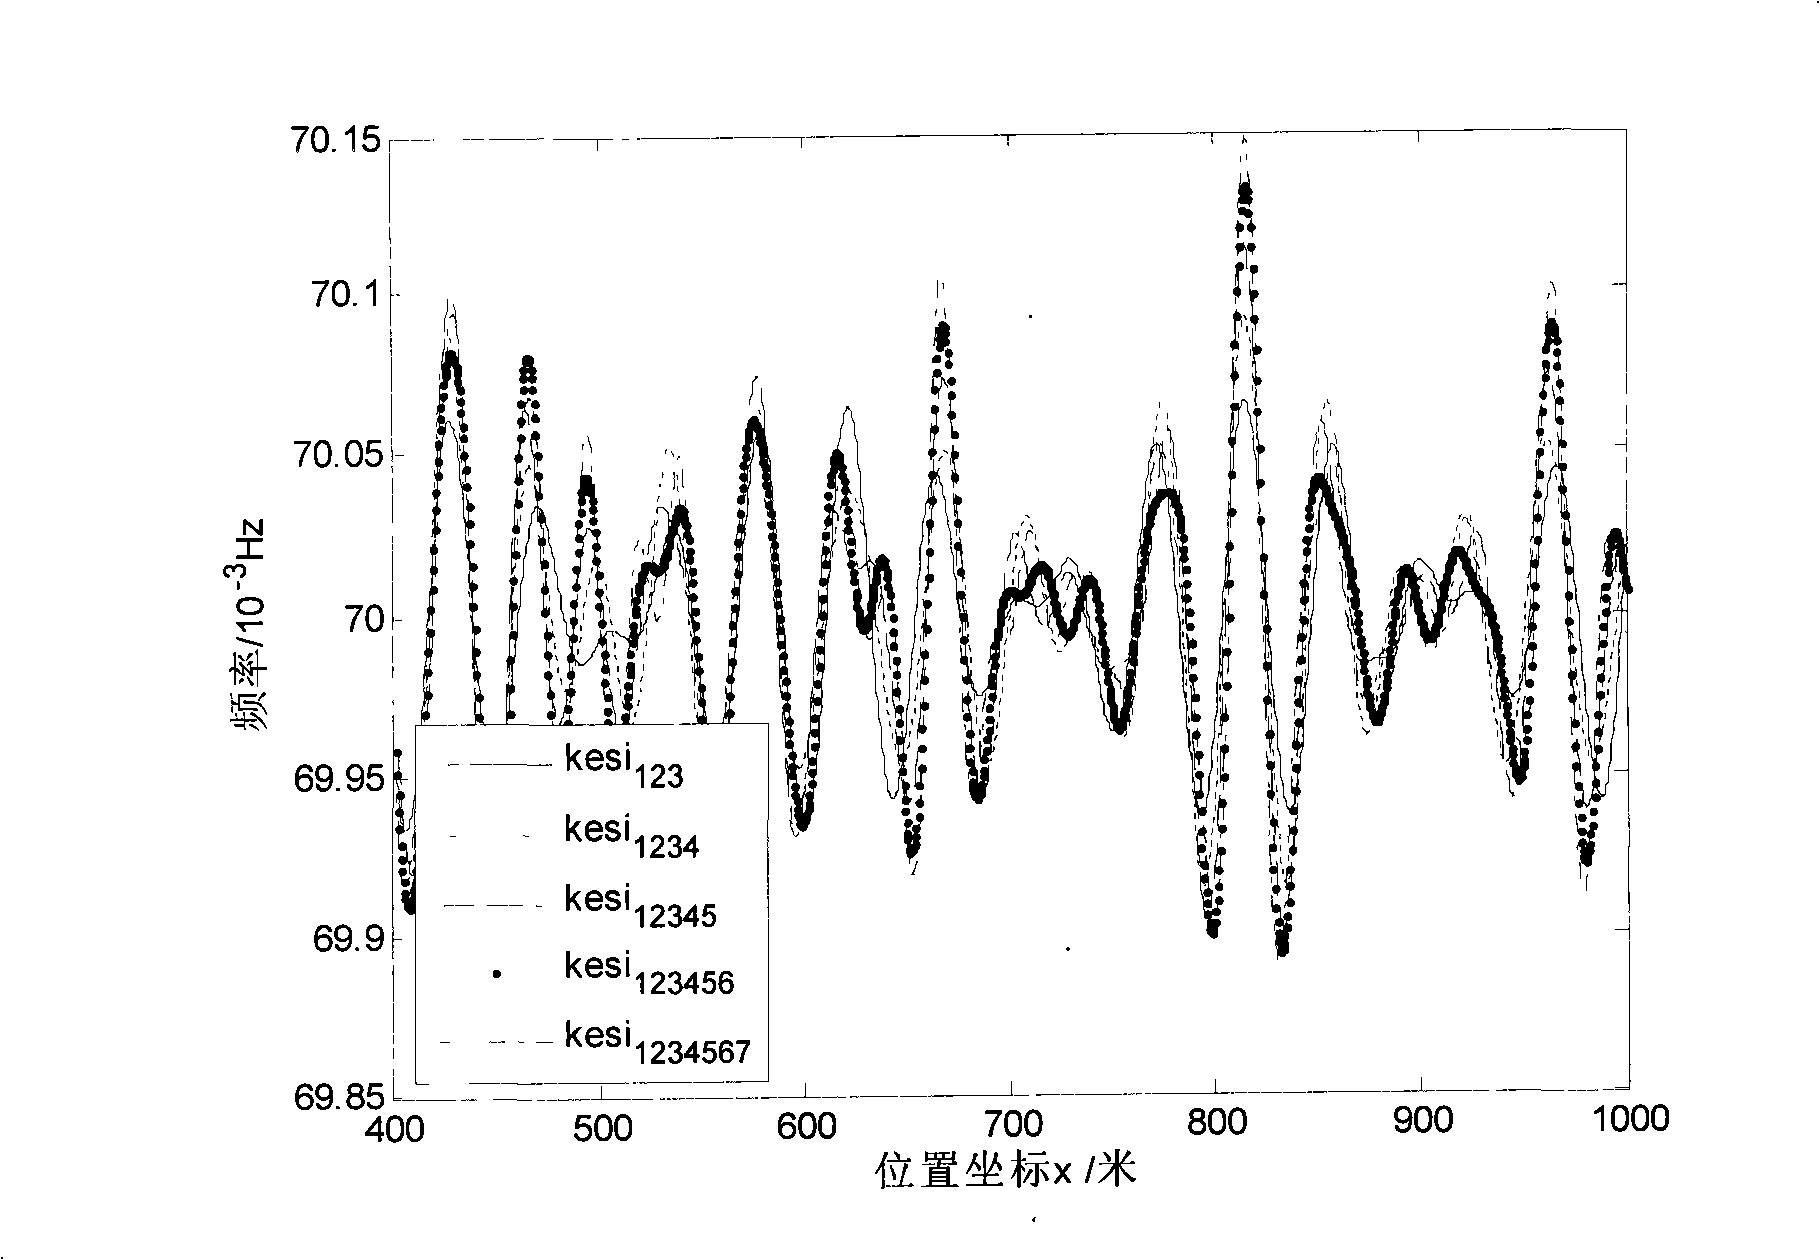 Sea evolution scene emulation method of multiple shortwave nonlinearly modulated by longwave